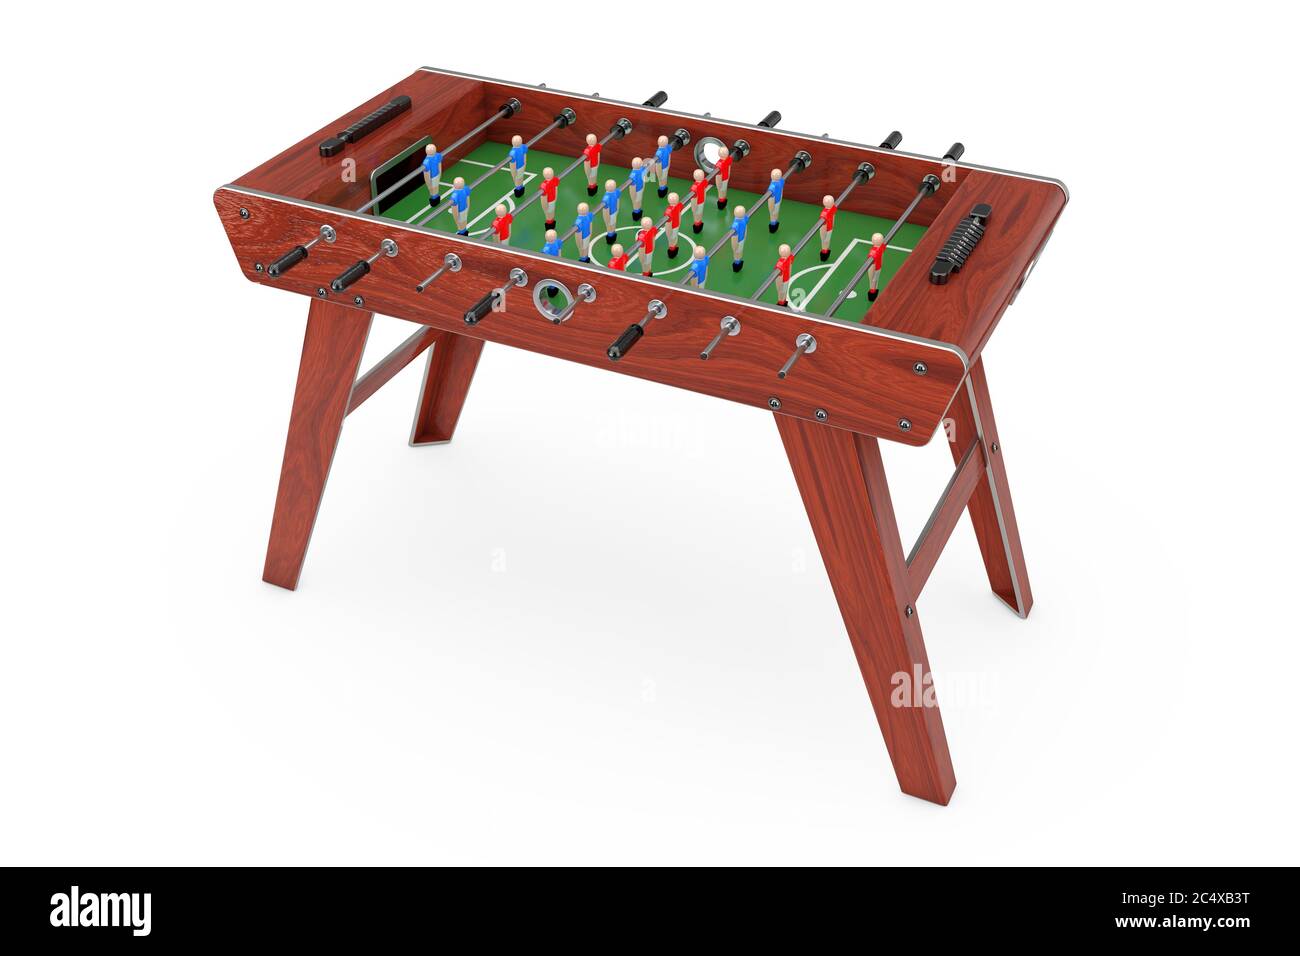 Soccer Table Football Game on a white background. 3d Rendering Stock Photo  - Alamy